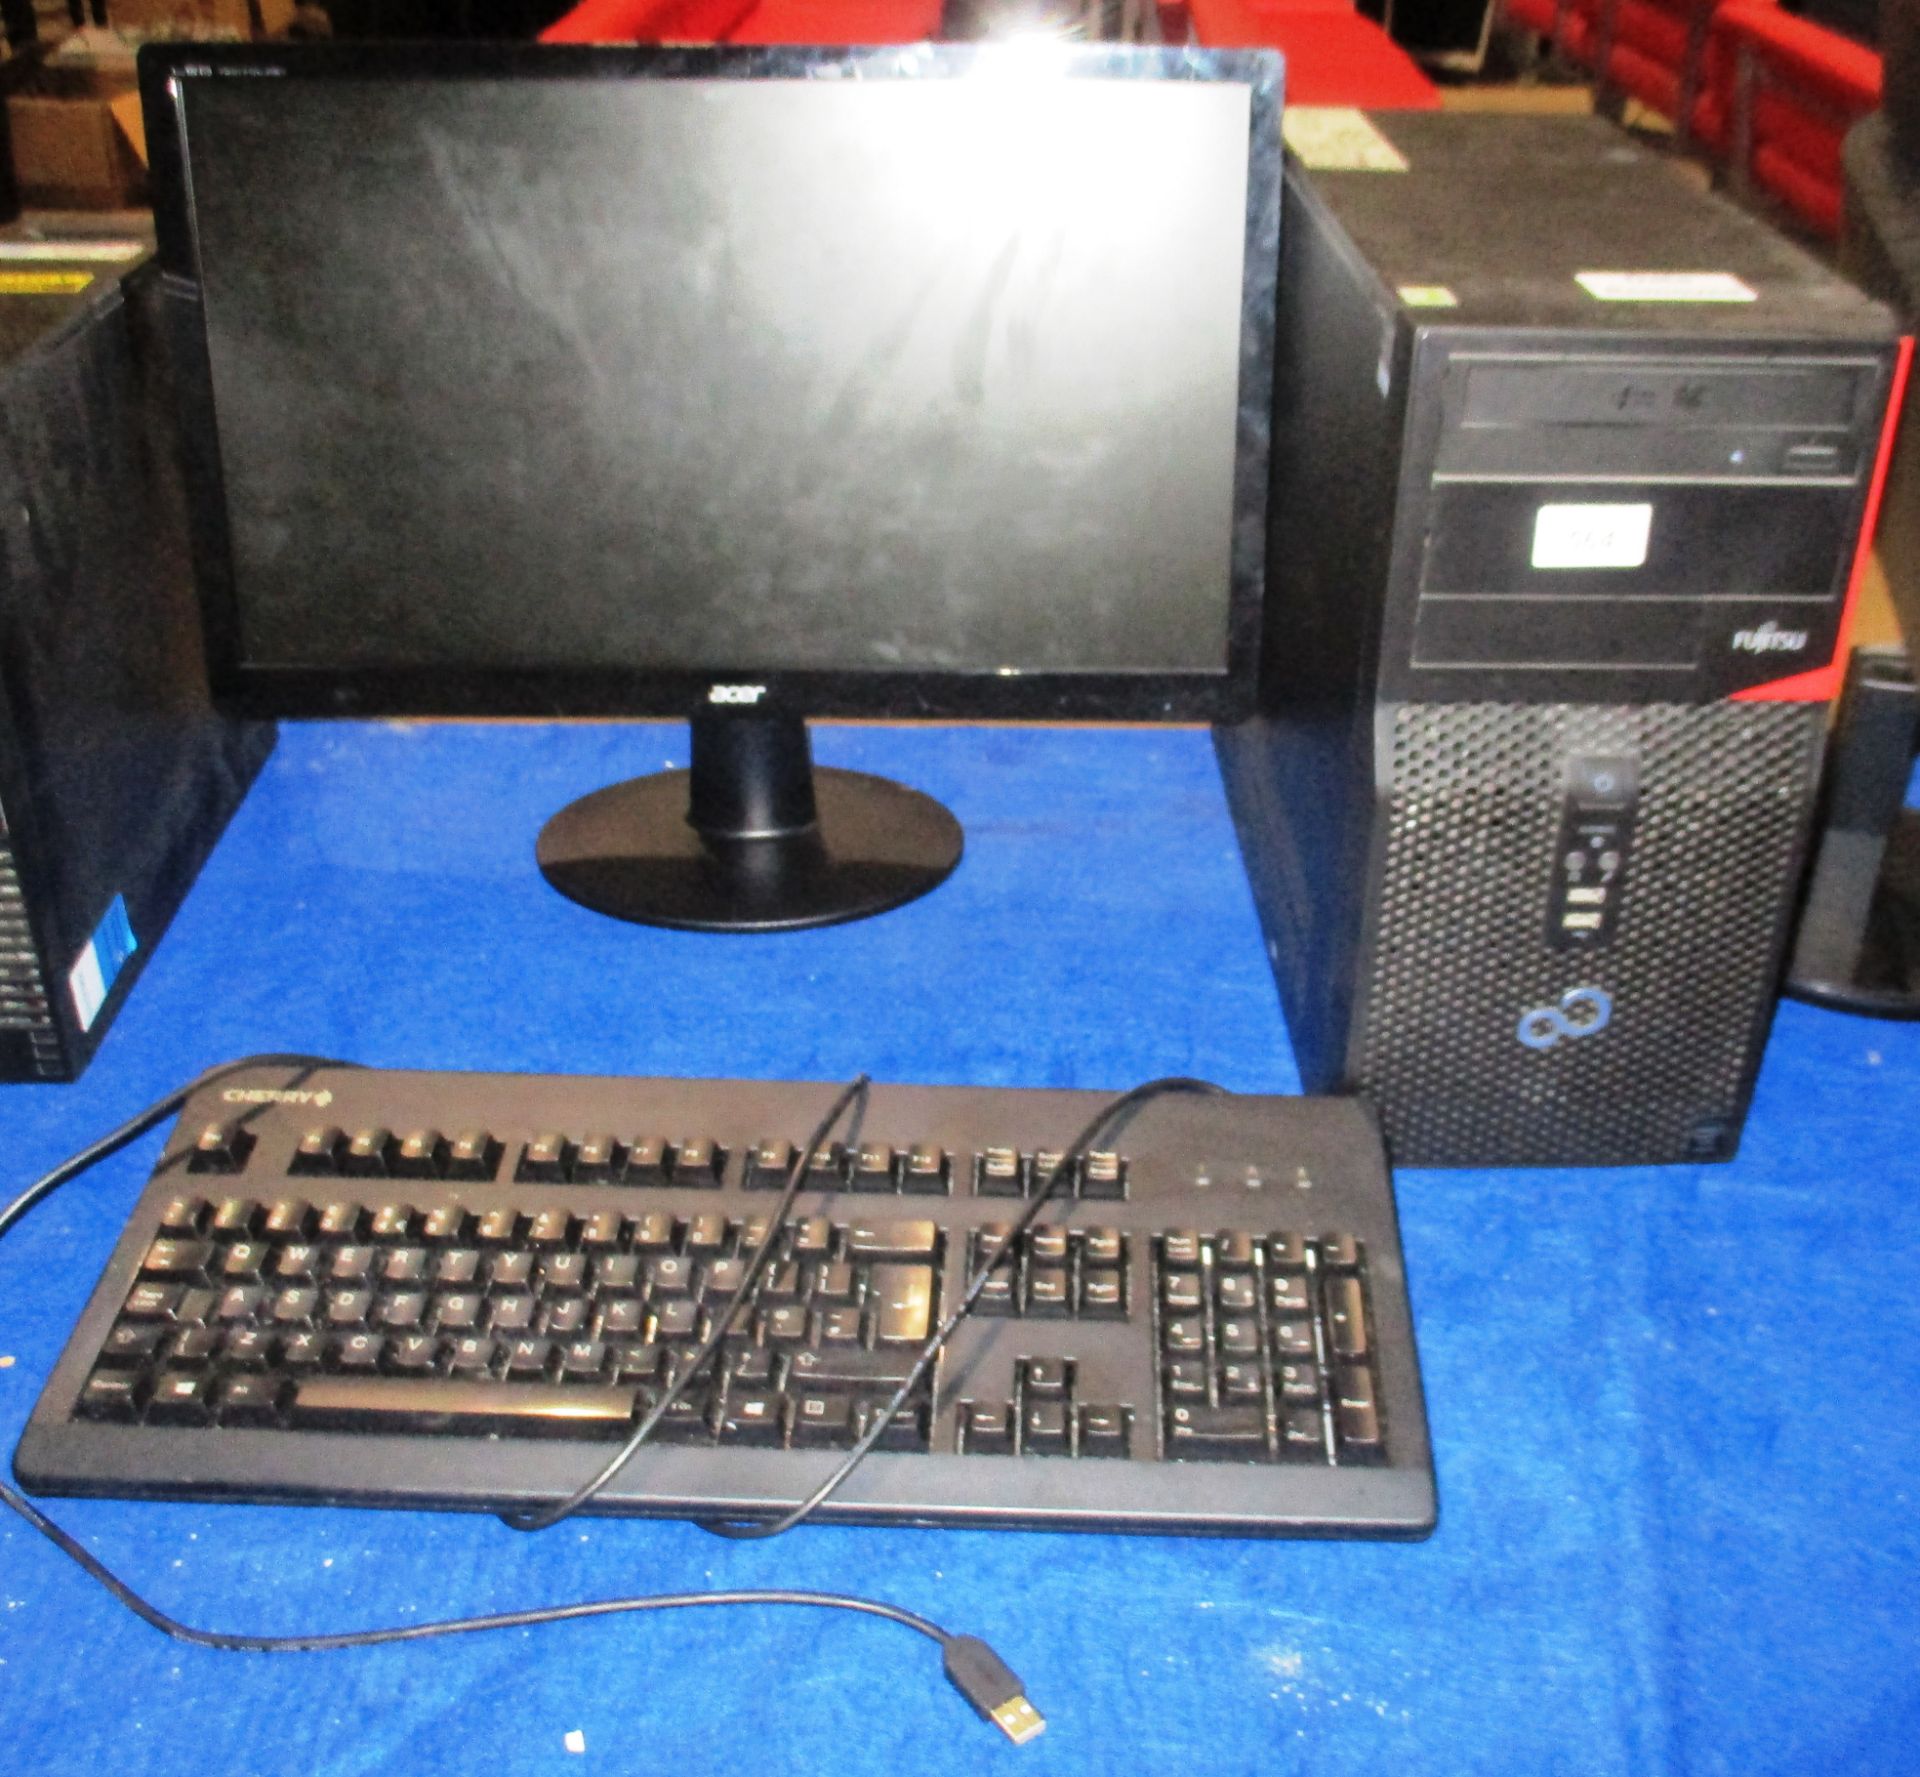 A Fujitsu tower computer - power lead complete with a Acer 22" LCD monitor - power lead,